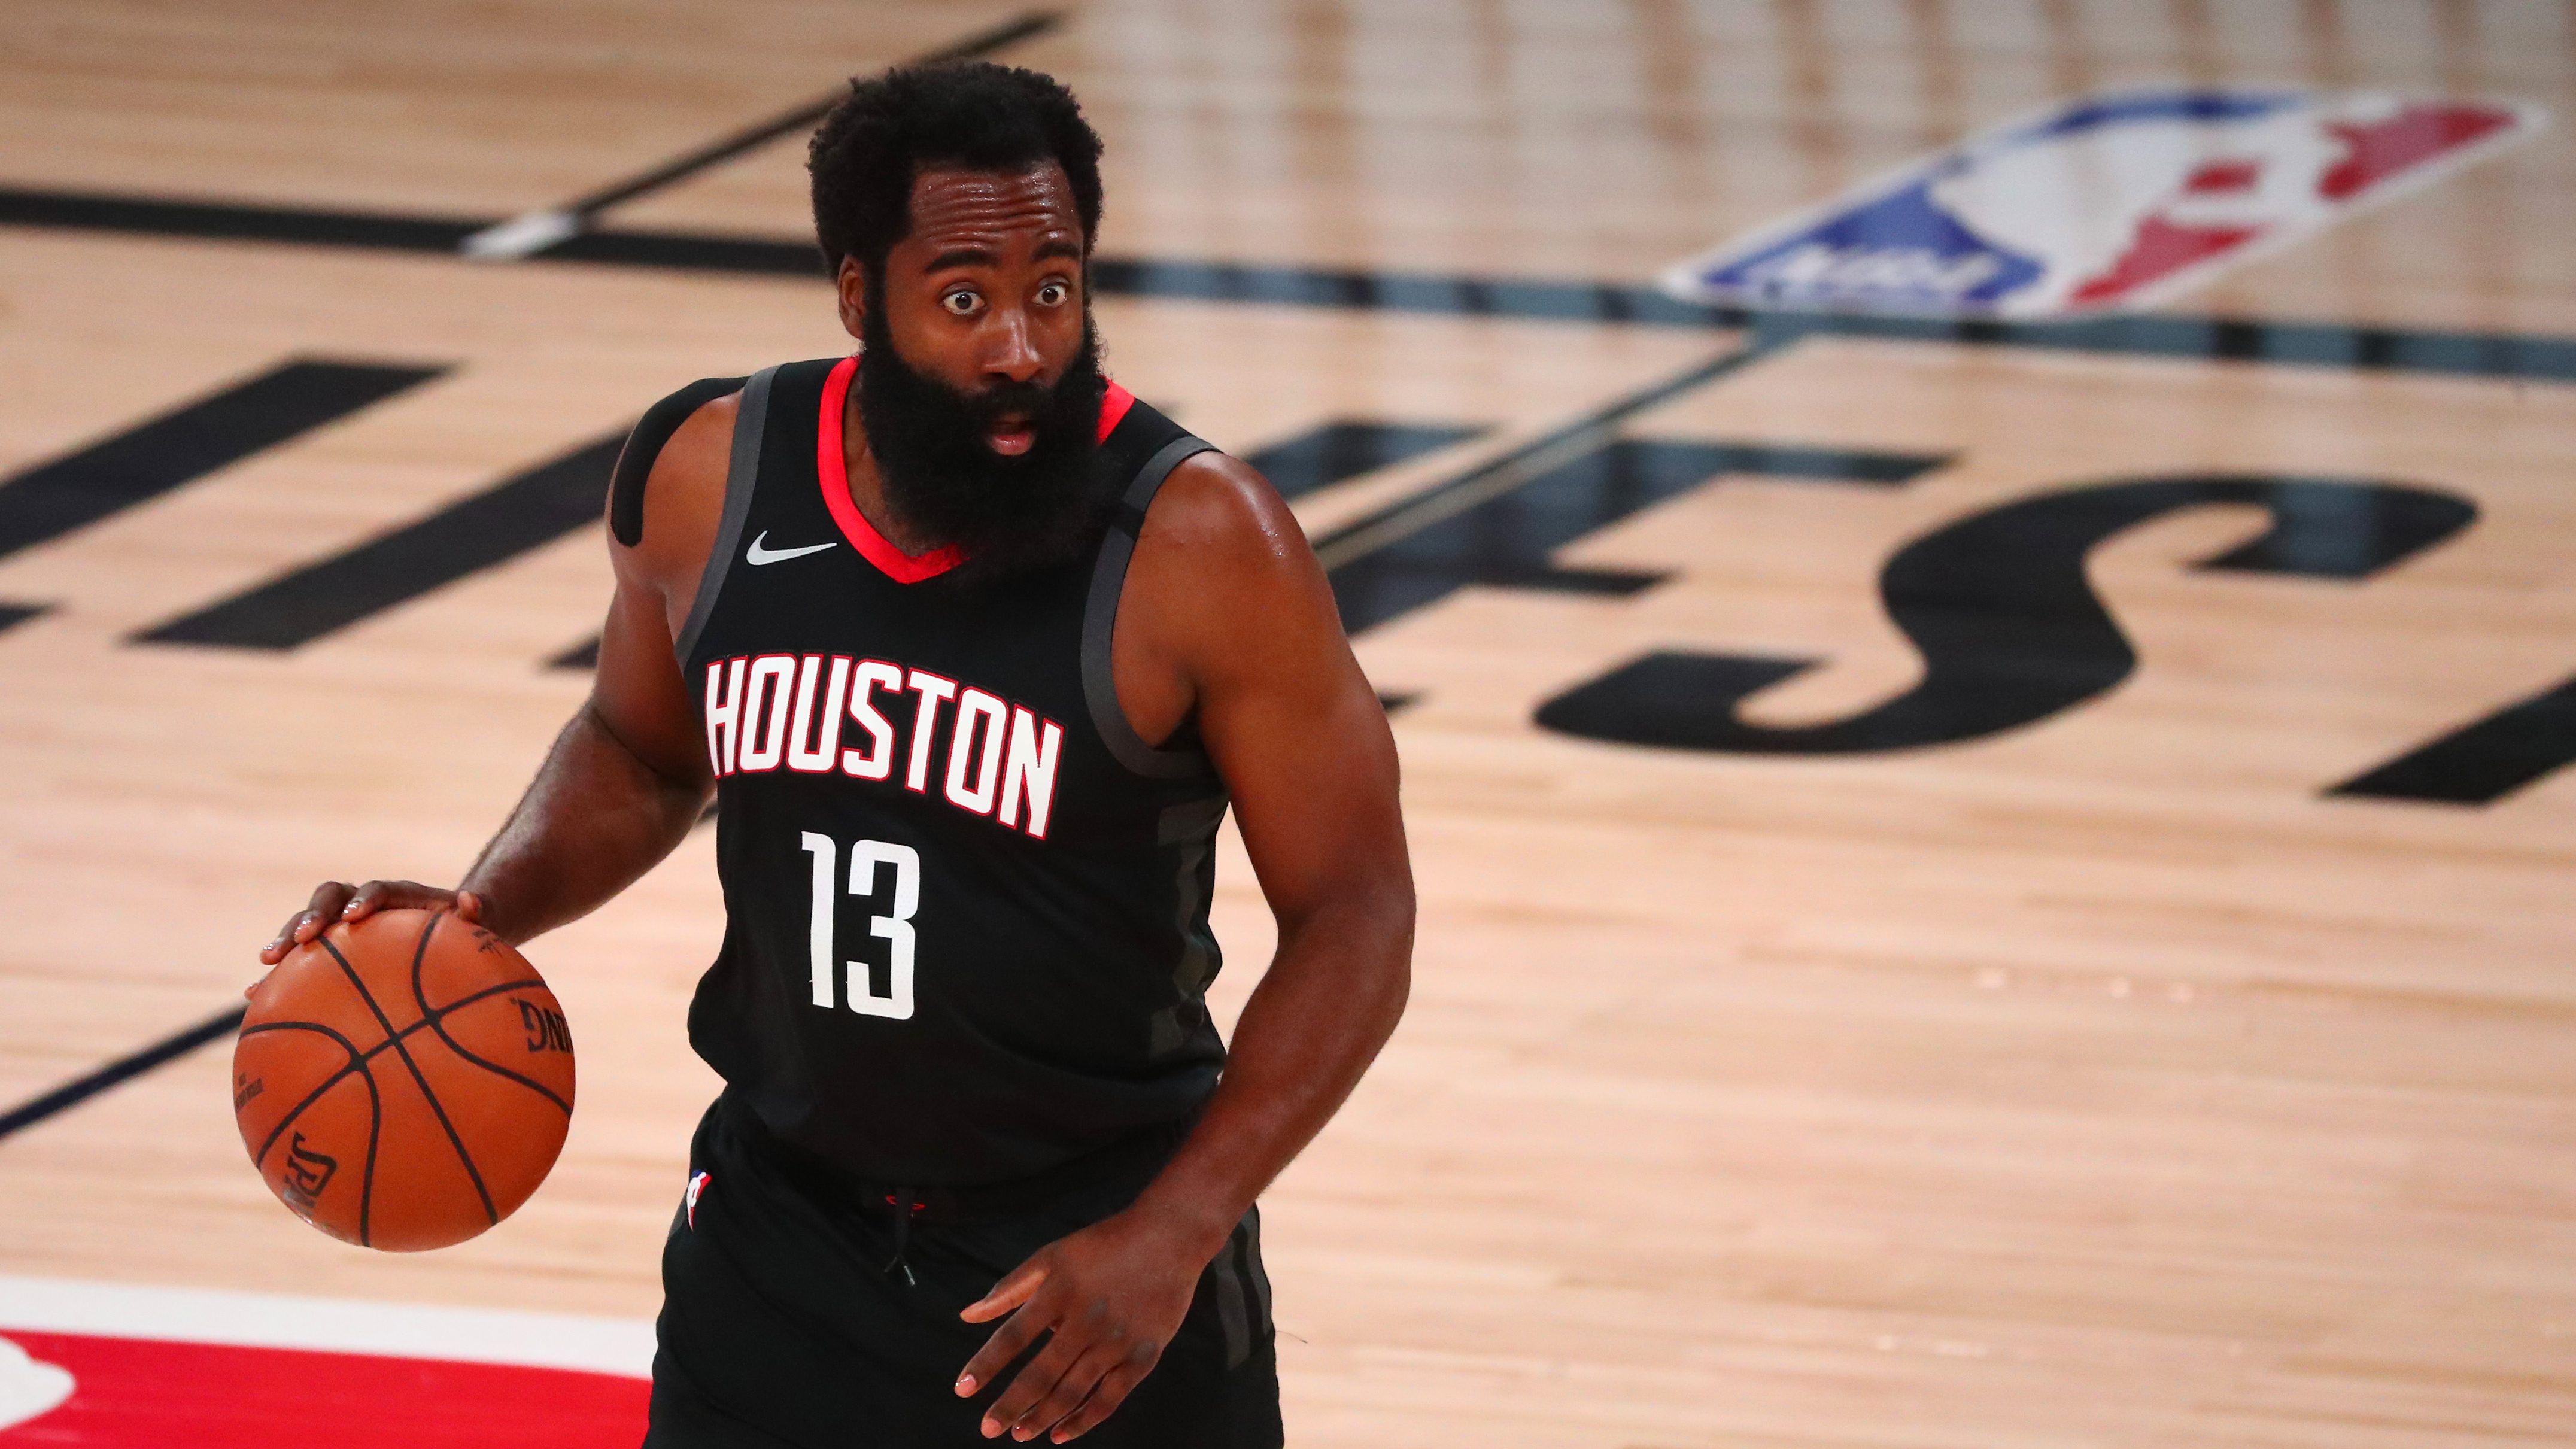 is this james harden jersey for sale somewhere, if not will i be